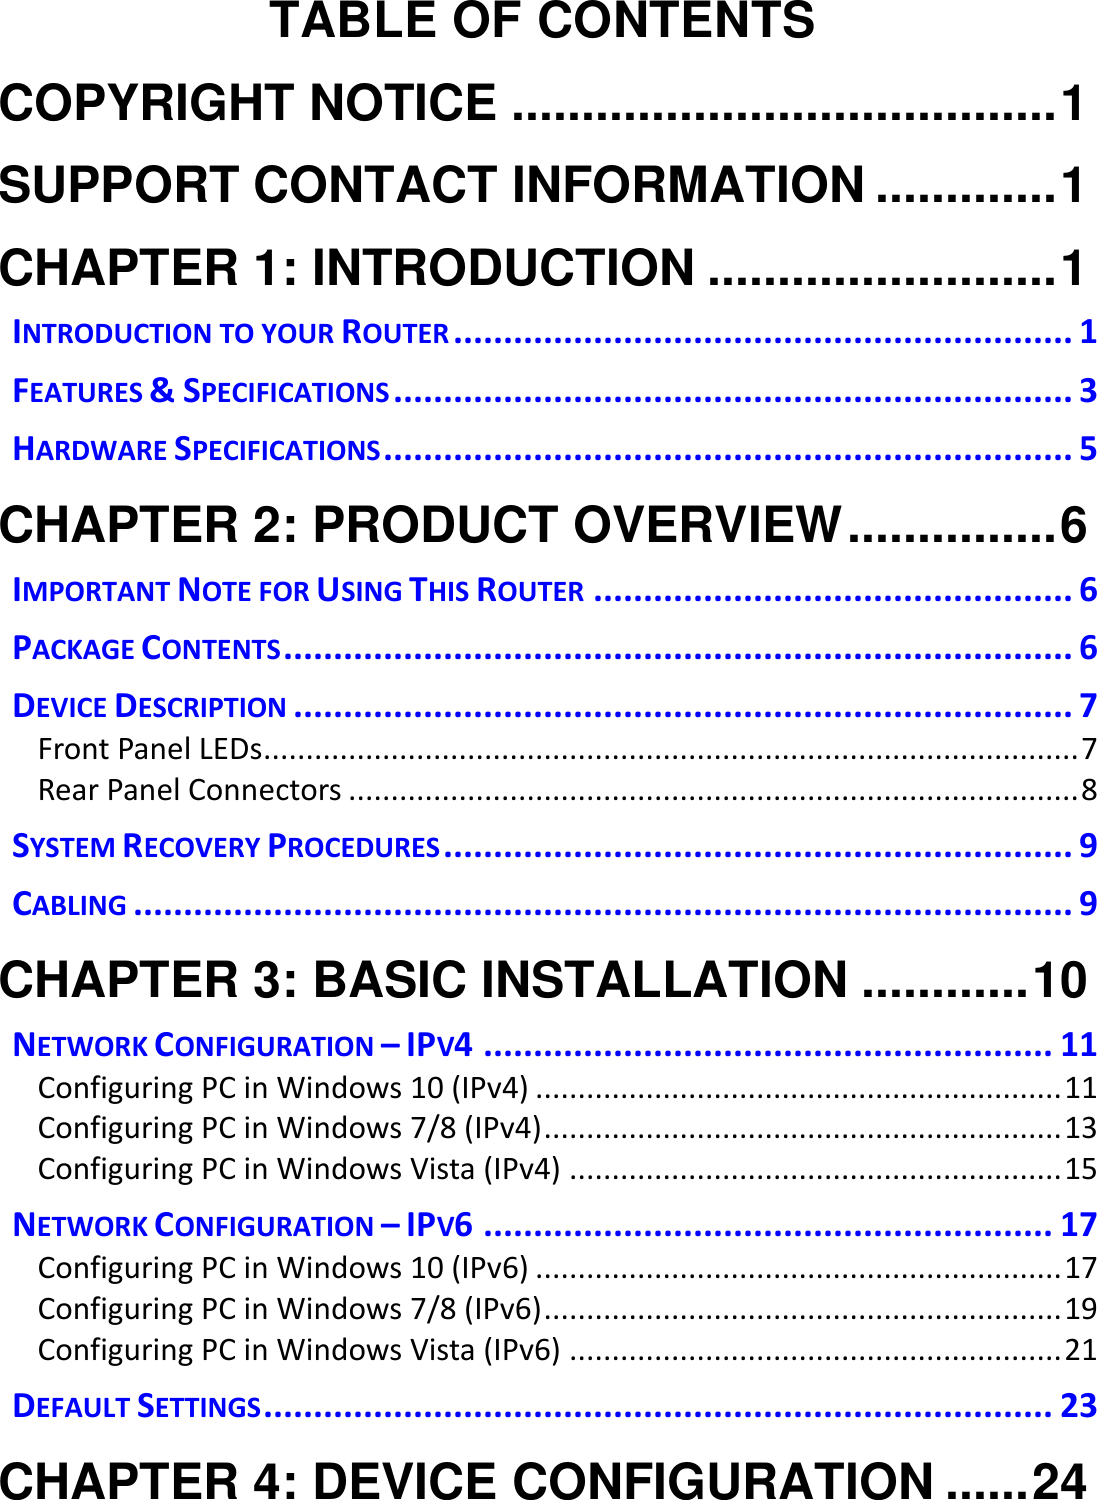   TABLE OF CONTENTS COPYRIGHT NOTICE ....................................... 1 SUPPORT CONTACT INFORMATION ............. 1 CHAPTER 1: INTRODUCTION ......................... 1 INTRODUCTION TO YOUR ROUTER .............................................................. 1 FEATURES &amp; SPECIFICATIONS .................................................................... 3 HARDWARE SPECIFICATIONS ..................................................................... 5 CHAPTER 2: PRODUCT OVERVIEW ............... 6 IMPORTANT NOTE FOR USING THIS ROUTER ................................................ 6 PACKAGE CONTENTS ............................................................................... 6 DEVICE DESCRIPTION .............................................................................. 7 Front Panel LEDs................................................................................................ 7 Rear Panel Connectors ...................................................................................... 8 SYSTEM RECOVERY PROCEDURES ............................................................... 9 CABLING .............................................................................................. 9 CHAPTER 3: BASIC INSTALLATION ............ 10 NETWORK CONFIGURATION – IPV4 ......................................................... 11 Configuring PC in Windows 10 (IPv4) .............................................................. 11 Configuring PC in Windows 7/8 (IPv4) ............................................................. 13 Configuring PC in Windows Vista (IPv4) .......................................................... 15 NETWORK CONFIGURATION – IPV6 ......................................................... 17 Configuring PC in Windows 10 (IPv6) .............................................................. 17 Configuring PC in Windows 7/8 (IPv6) ............................................................. 19 Configuring PC in Windows Vista (IPv6) .......................................................... 21 DEFAULT SETTINGS ............................................................................... 23 CHAPTER 4: DEVICE CONFIGURATION ...... 24 